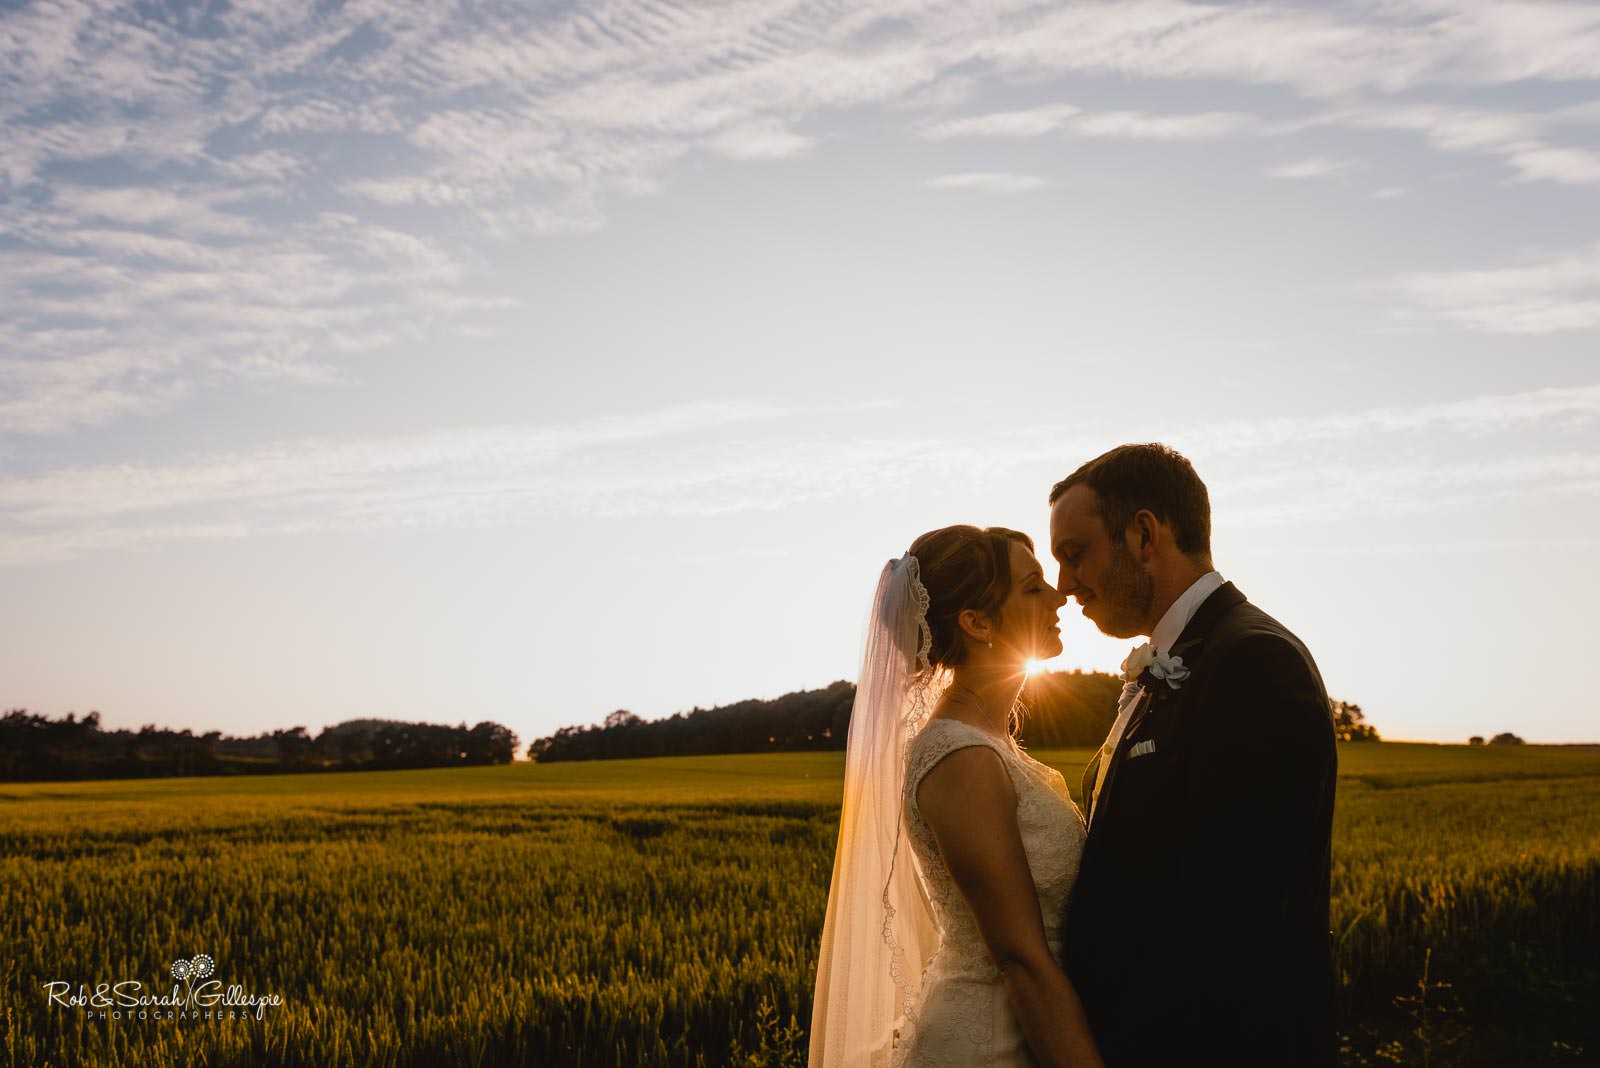 Natural and beautiful wedding photography at Swallows Nest Barn in Warwickshire